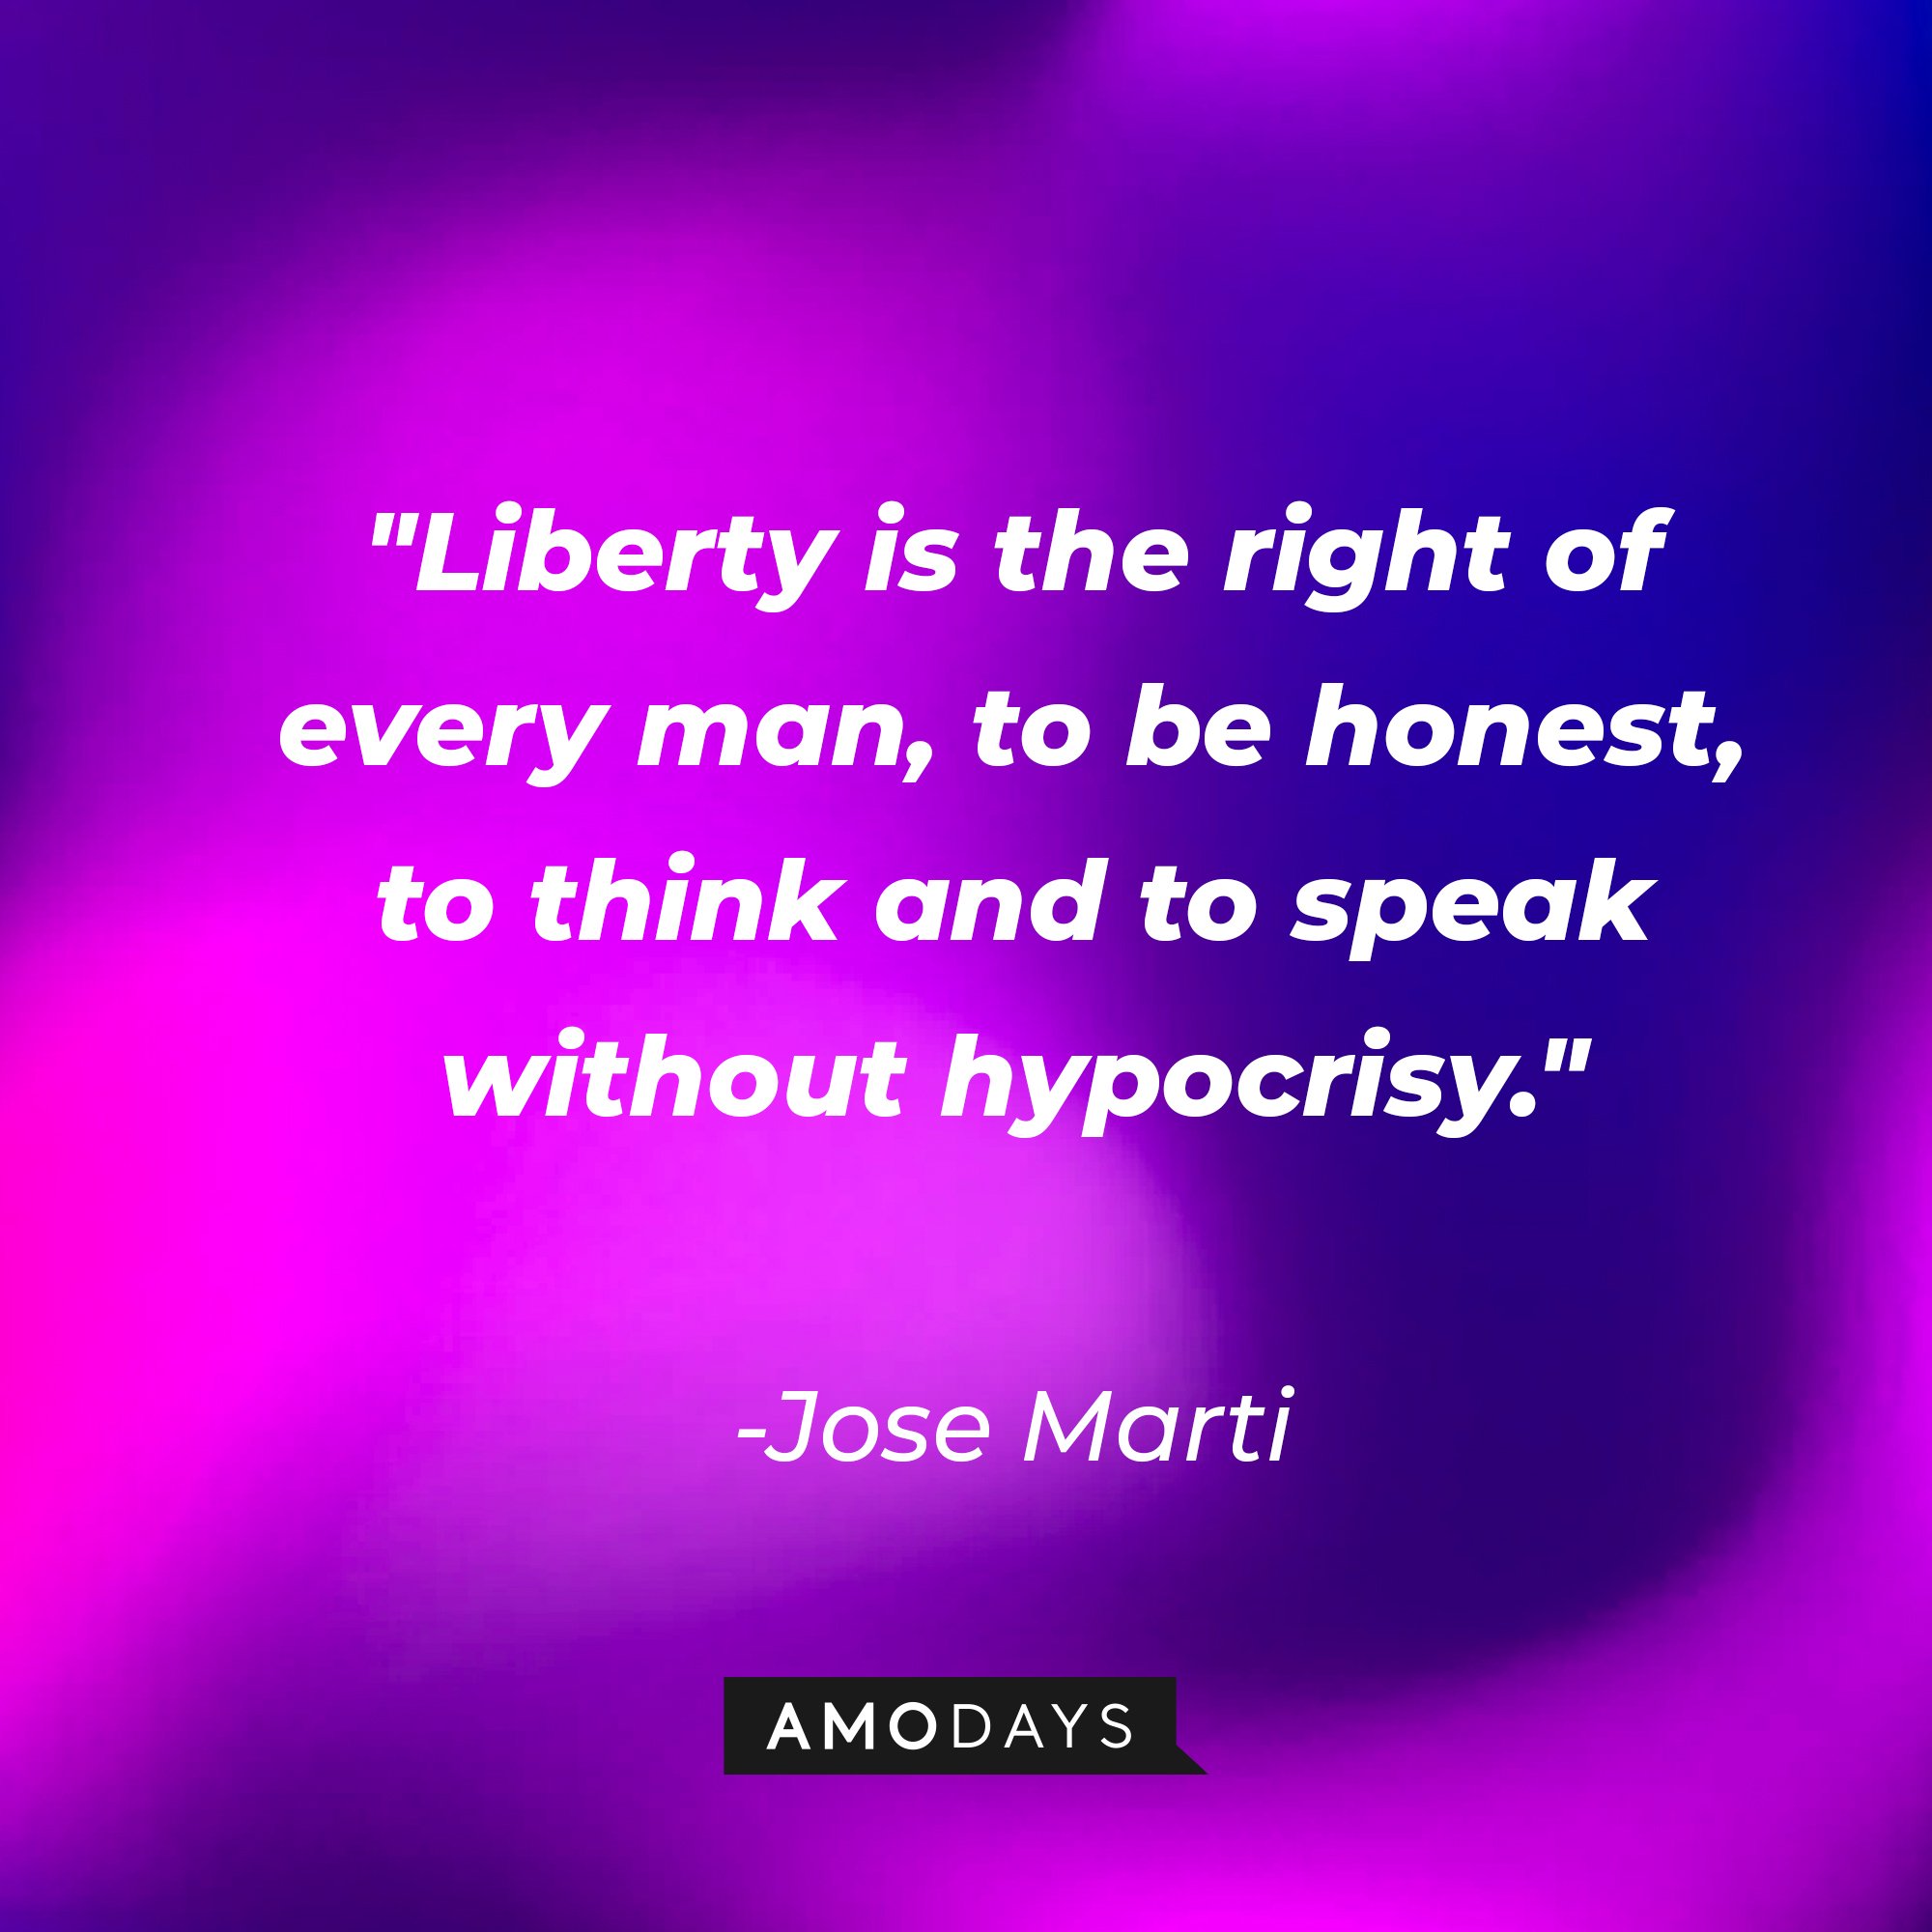 Jose Marti's quote:\\\\\\\\\\\\\\\\u00a0"Liberty is the right of every man, to be honest, to think and to speak without hypocrisy."\\\\\\\\\\\\\\\\u00a0| Image: AmoDays